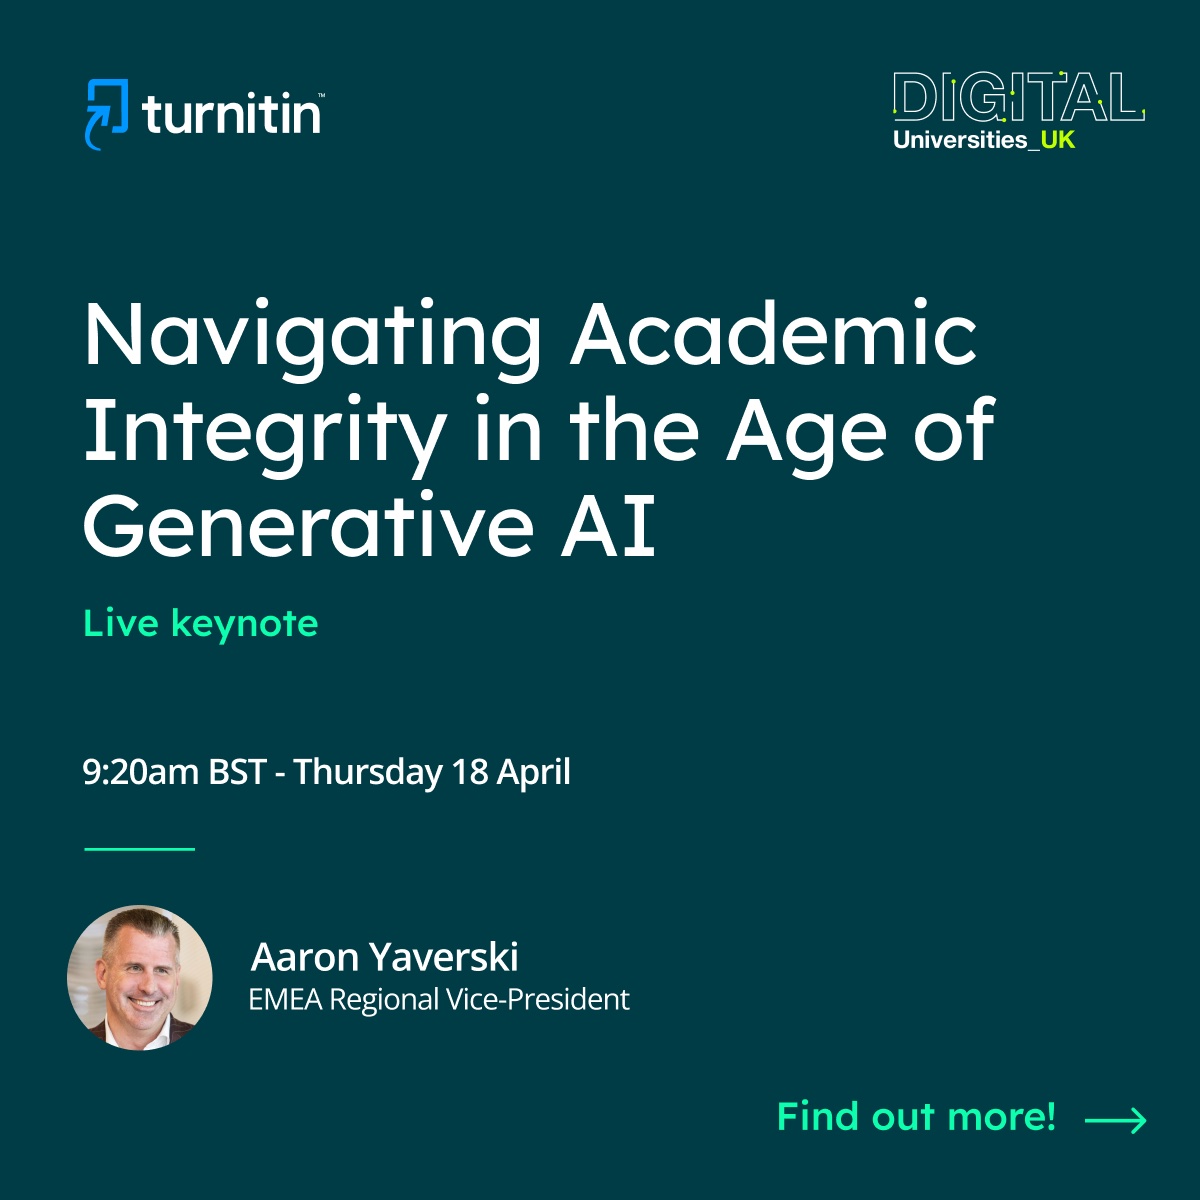 Turnitin's delighted to announce its attendance at @THEeventsglobal's Digital Universities UK as the event's #AcademicIntegrity partner. Hear from Turnitin's EMEA Regional Vice President Aaron Yaverski on academic integrity in the age of #AI. ow.ly/UQUn50R9EXG #THEdigitalUK